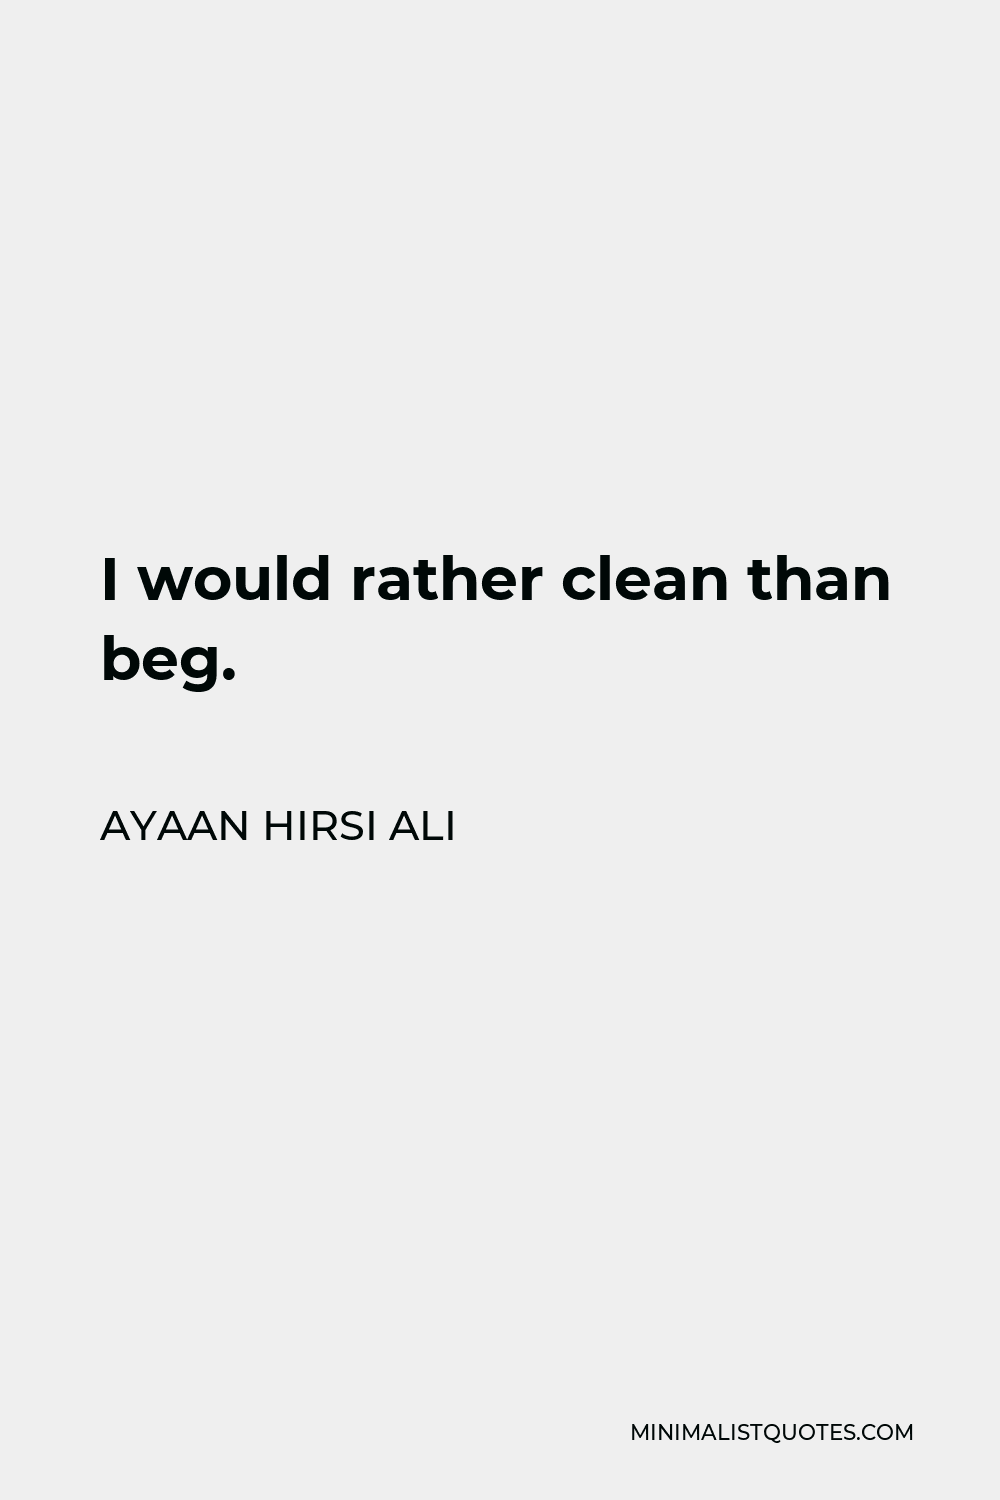 Ayaan Hirsi Ali Quote - I would rather clean than beg.